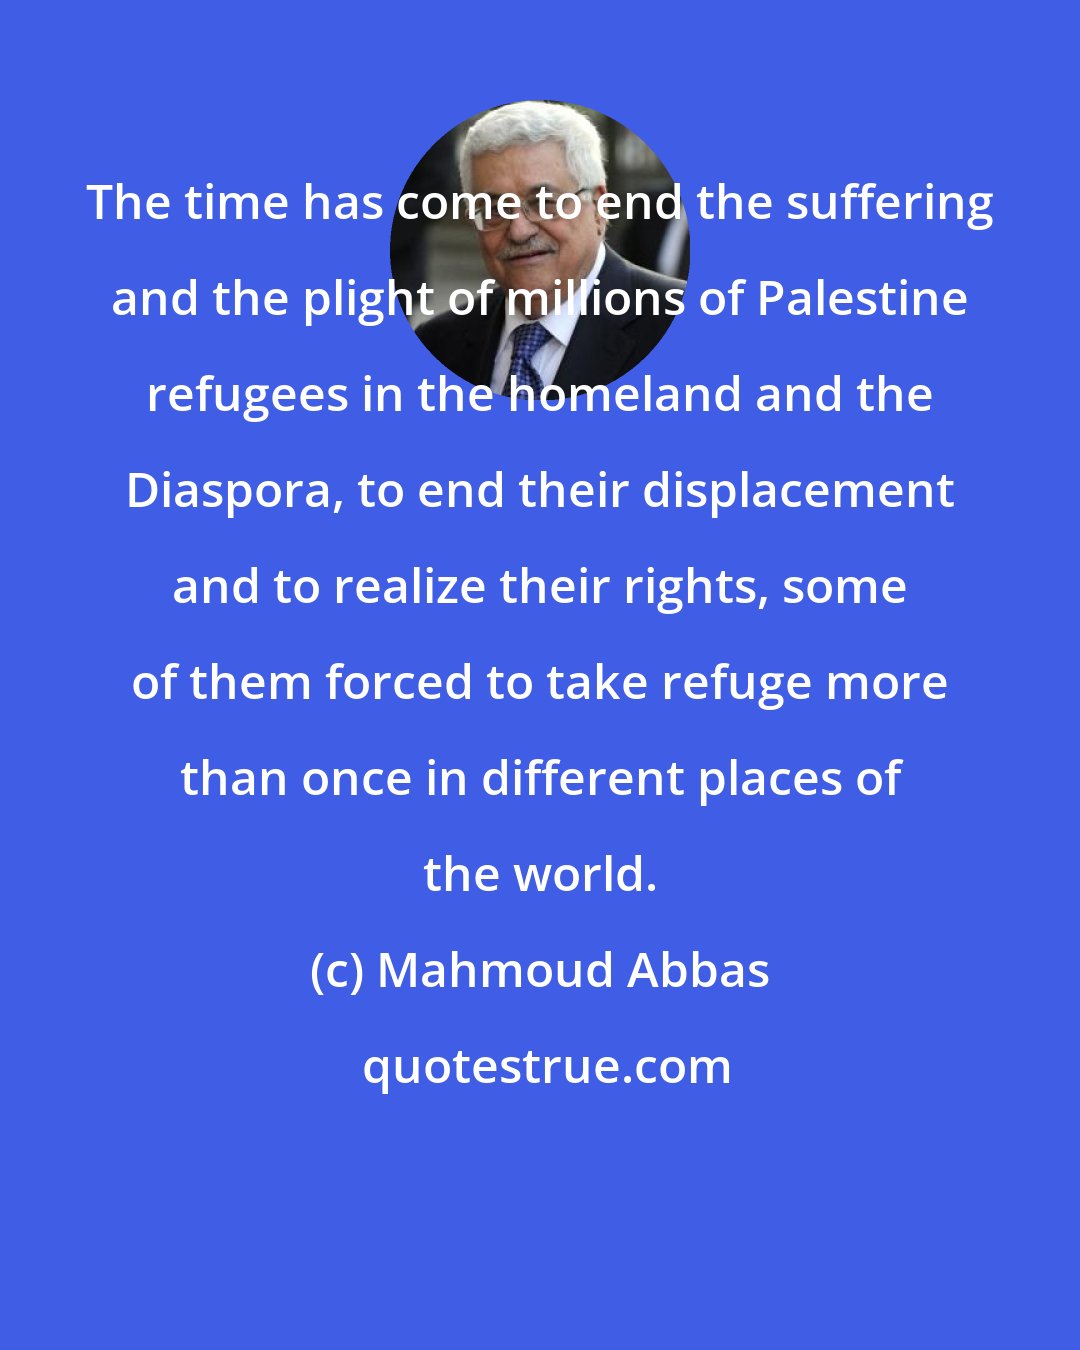 Mahmoud Abbas: The time has come to end the suffering and the plight of millions of Palestine refugees in the homeland and the Diaspora, to end their displacement and to realize their rights, some of them forced to take refuge more than once in different places of the world.